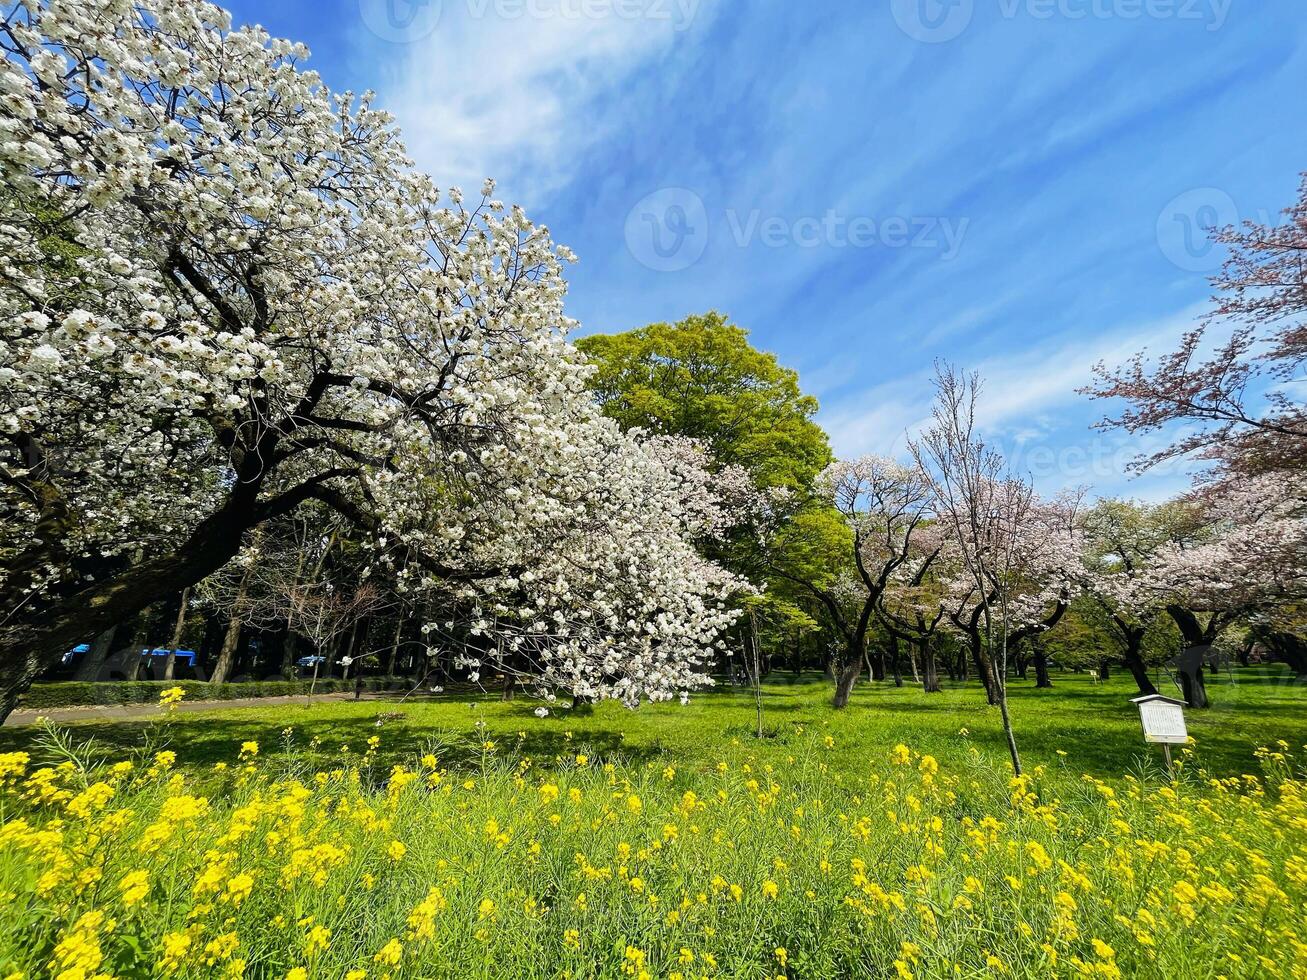 Japanese cherry blossoms in full bloom on a fresh green lawn in spring season horizontal photo